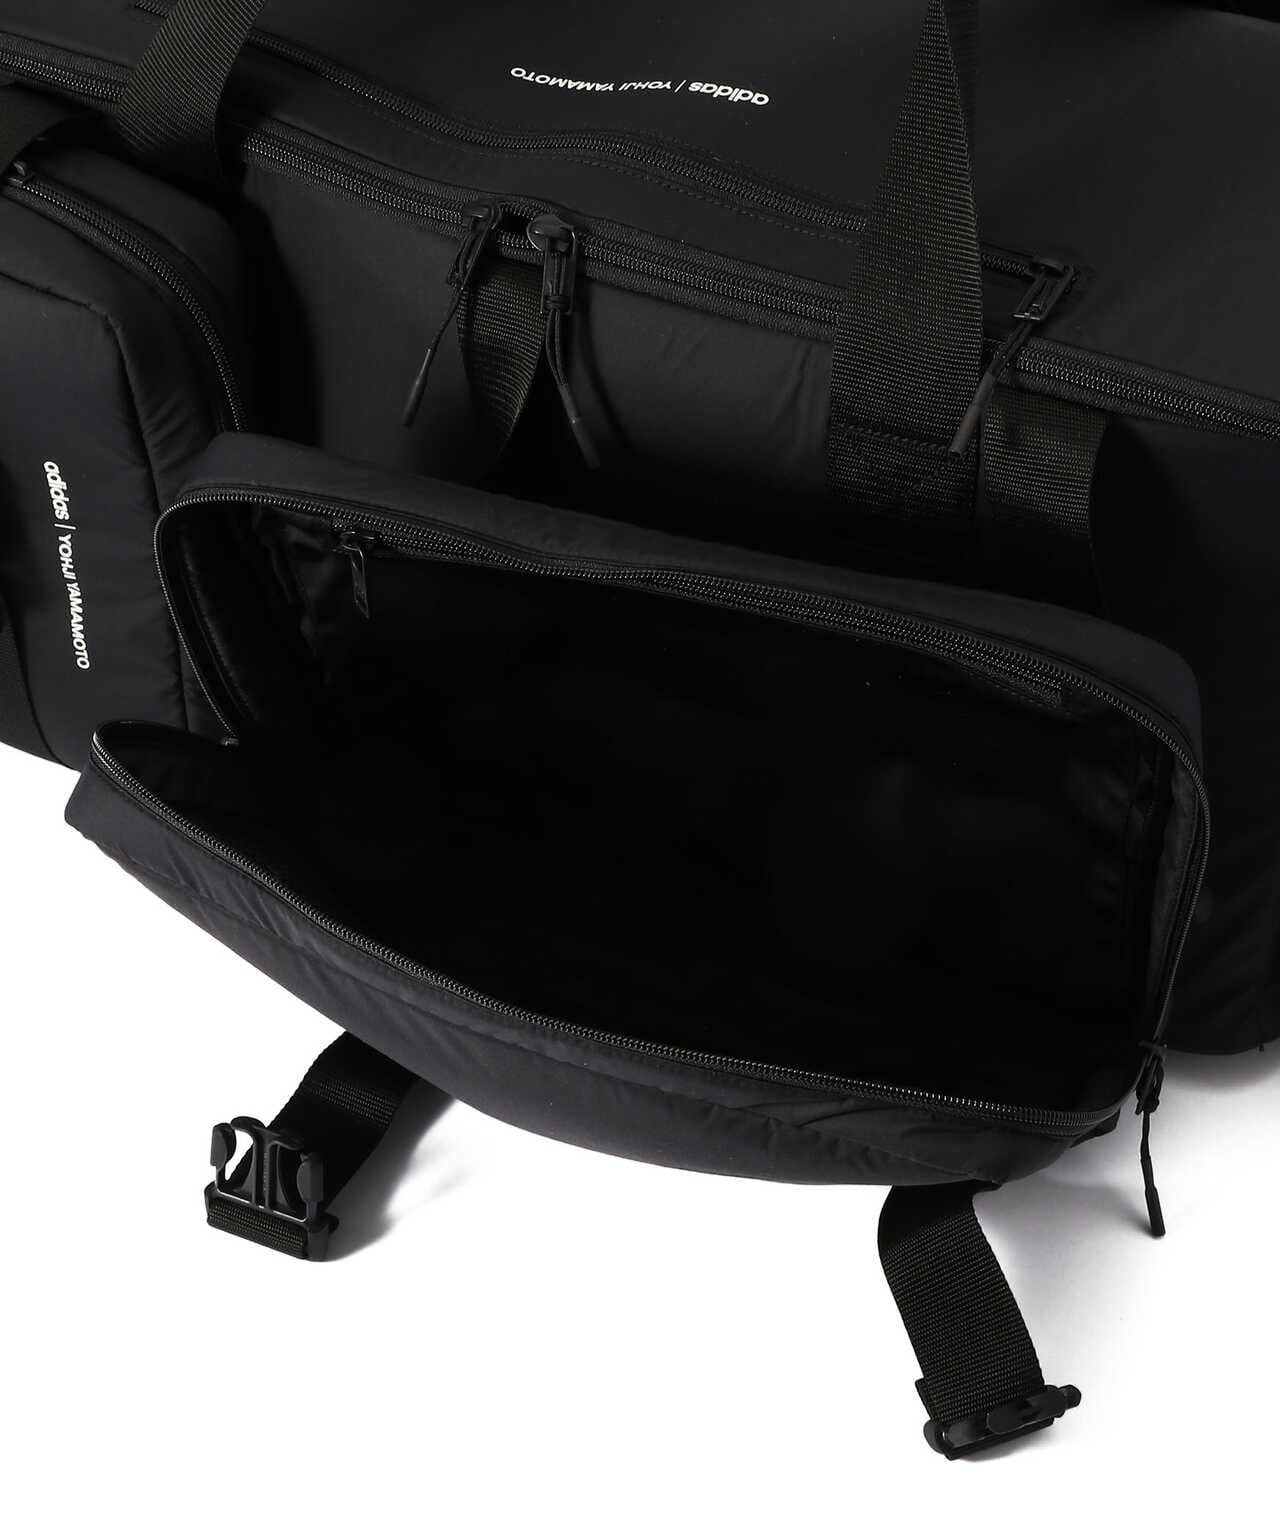 Y-3/ワイスリー/MOBILE ARCHIVE HOLDALL/バッグ